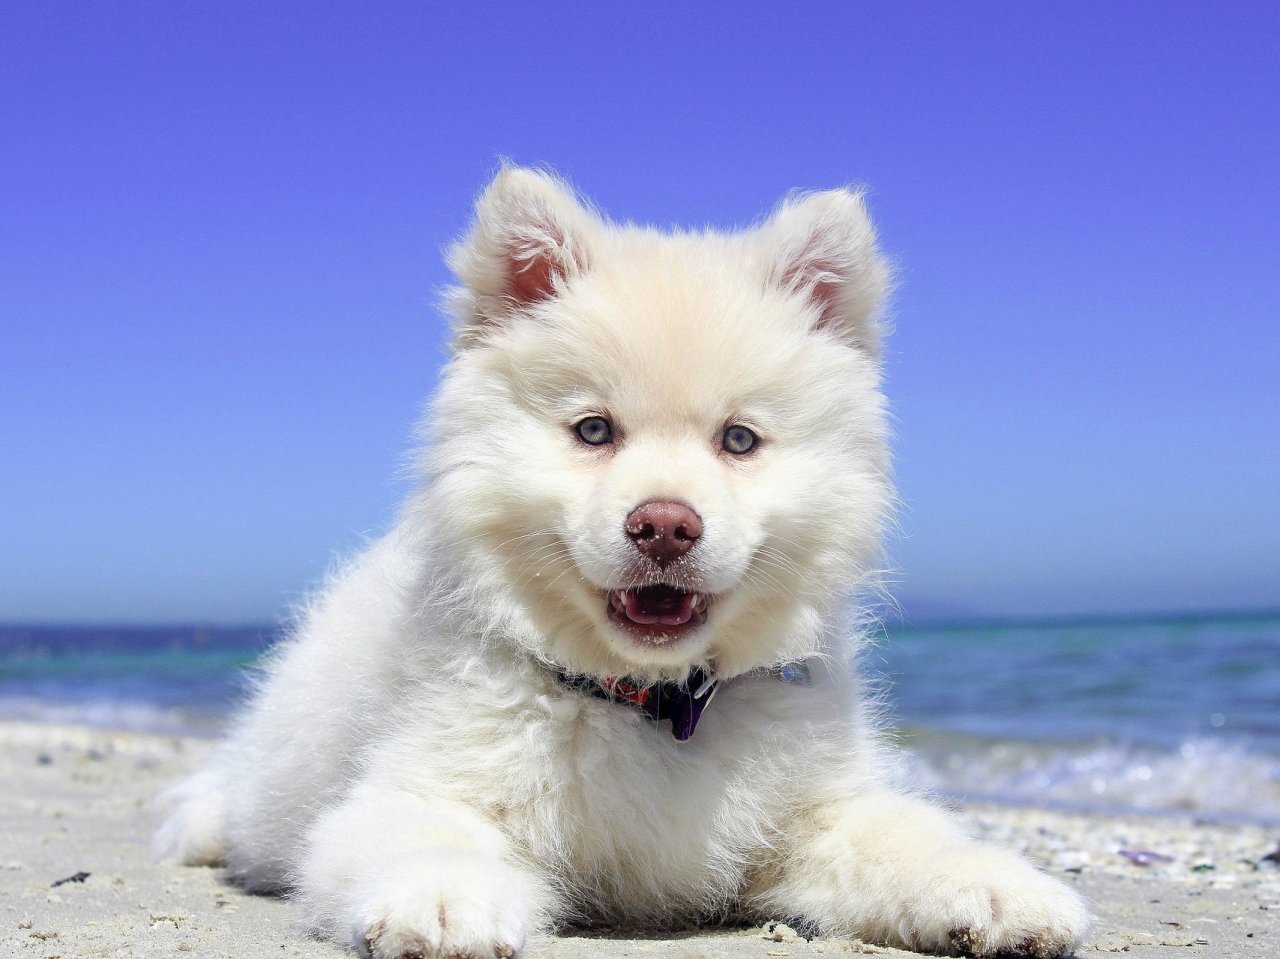 Puppy on the beach jigsaw puzzle